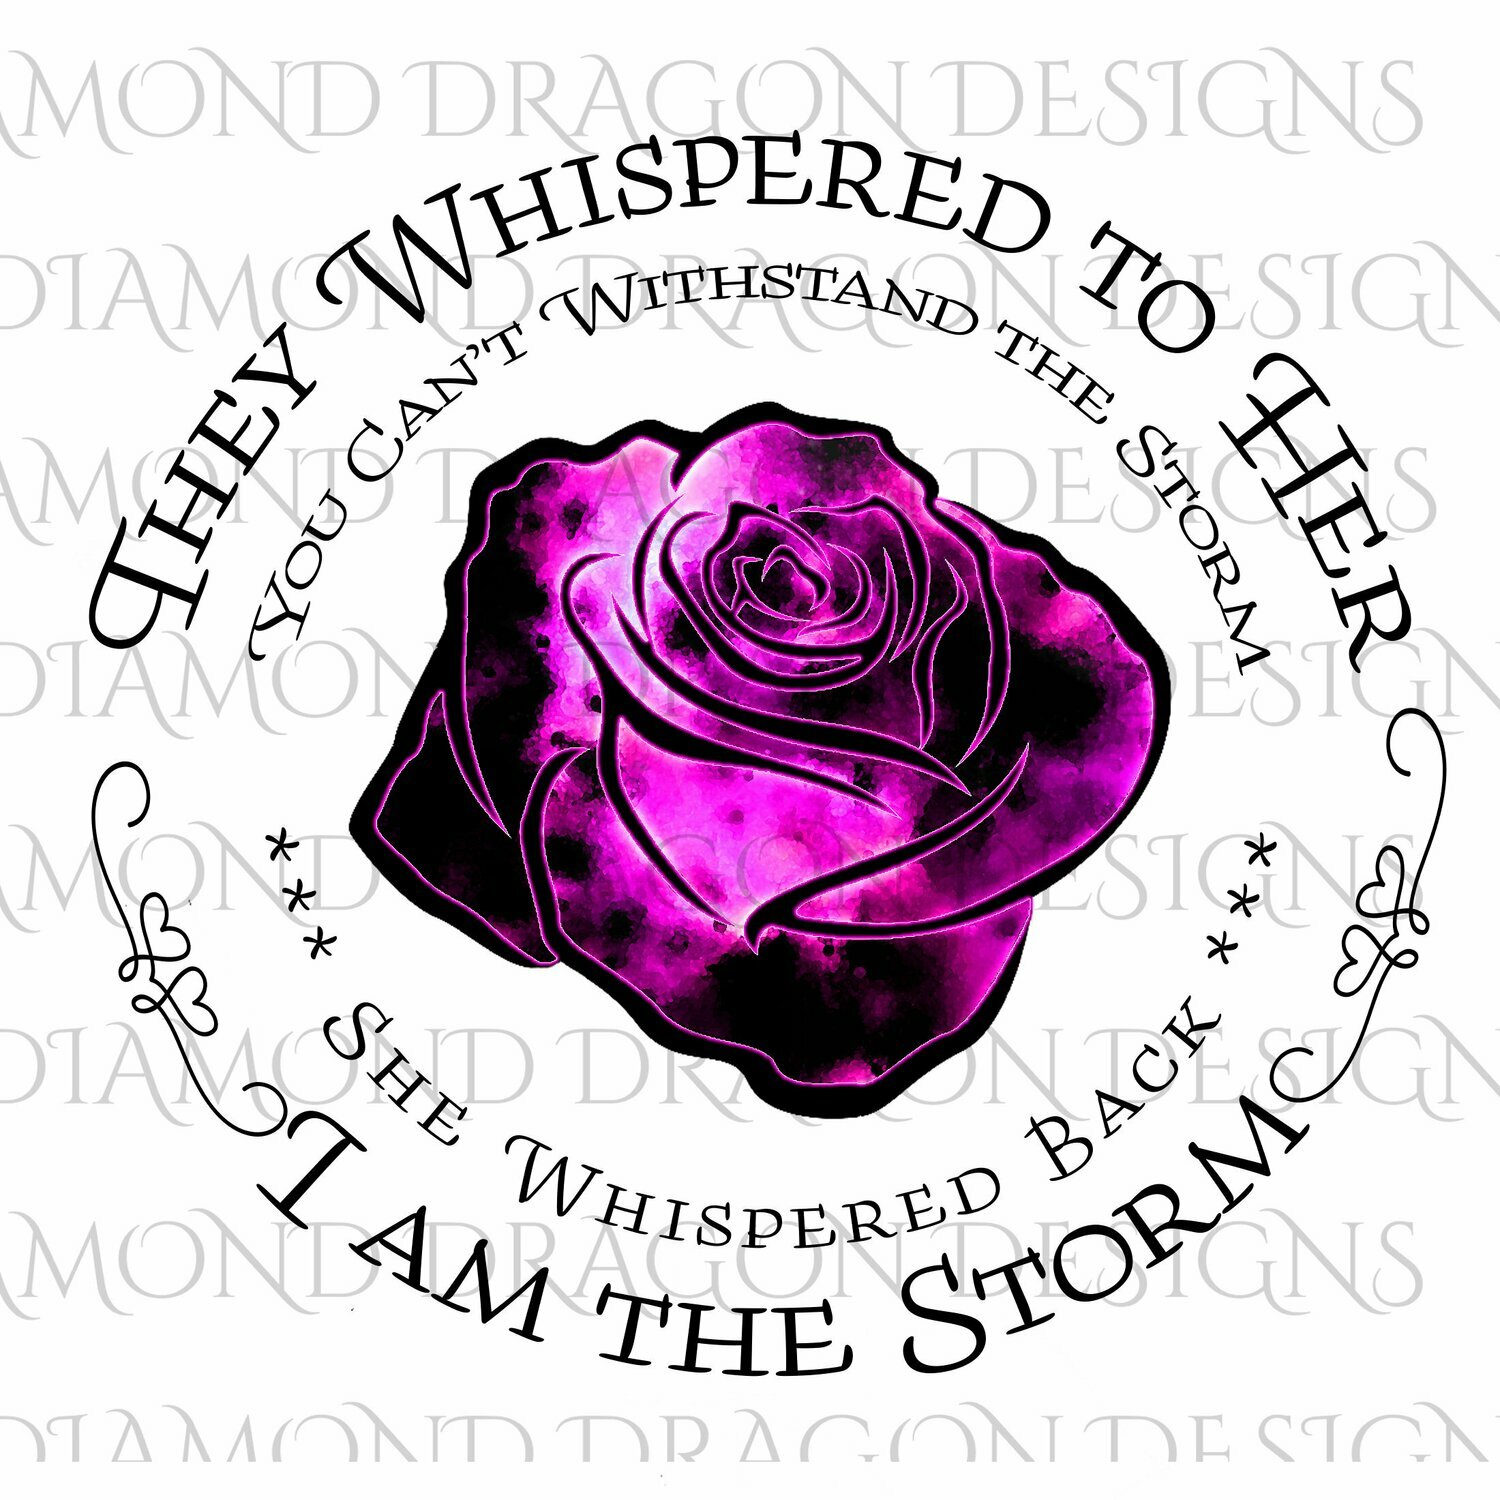 Flowers - They Whispered to Her, Cannot Withstand the Storm, I am the Storm, Quote, Pink Galaxy Rose, Waterslide